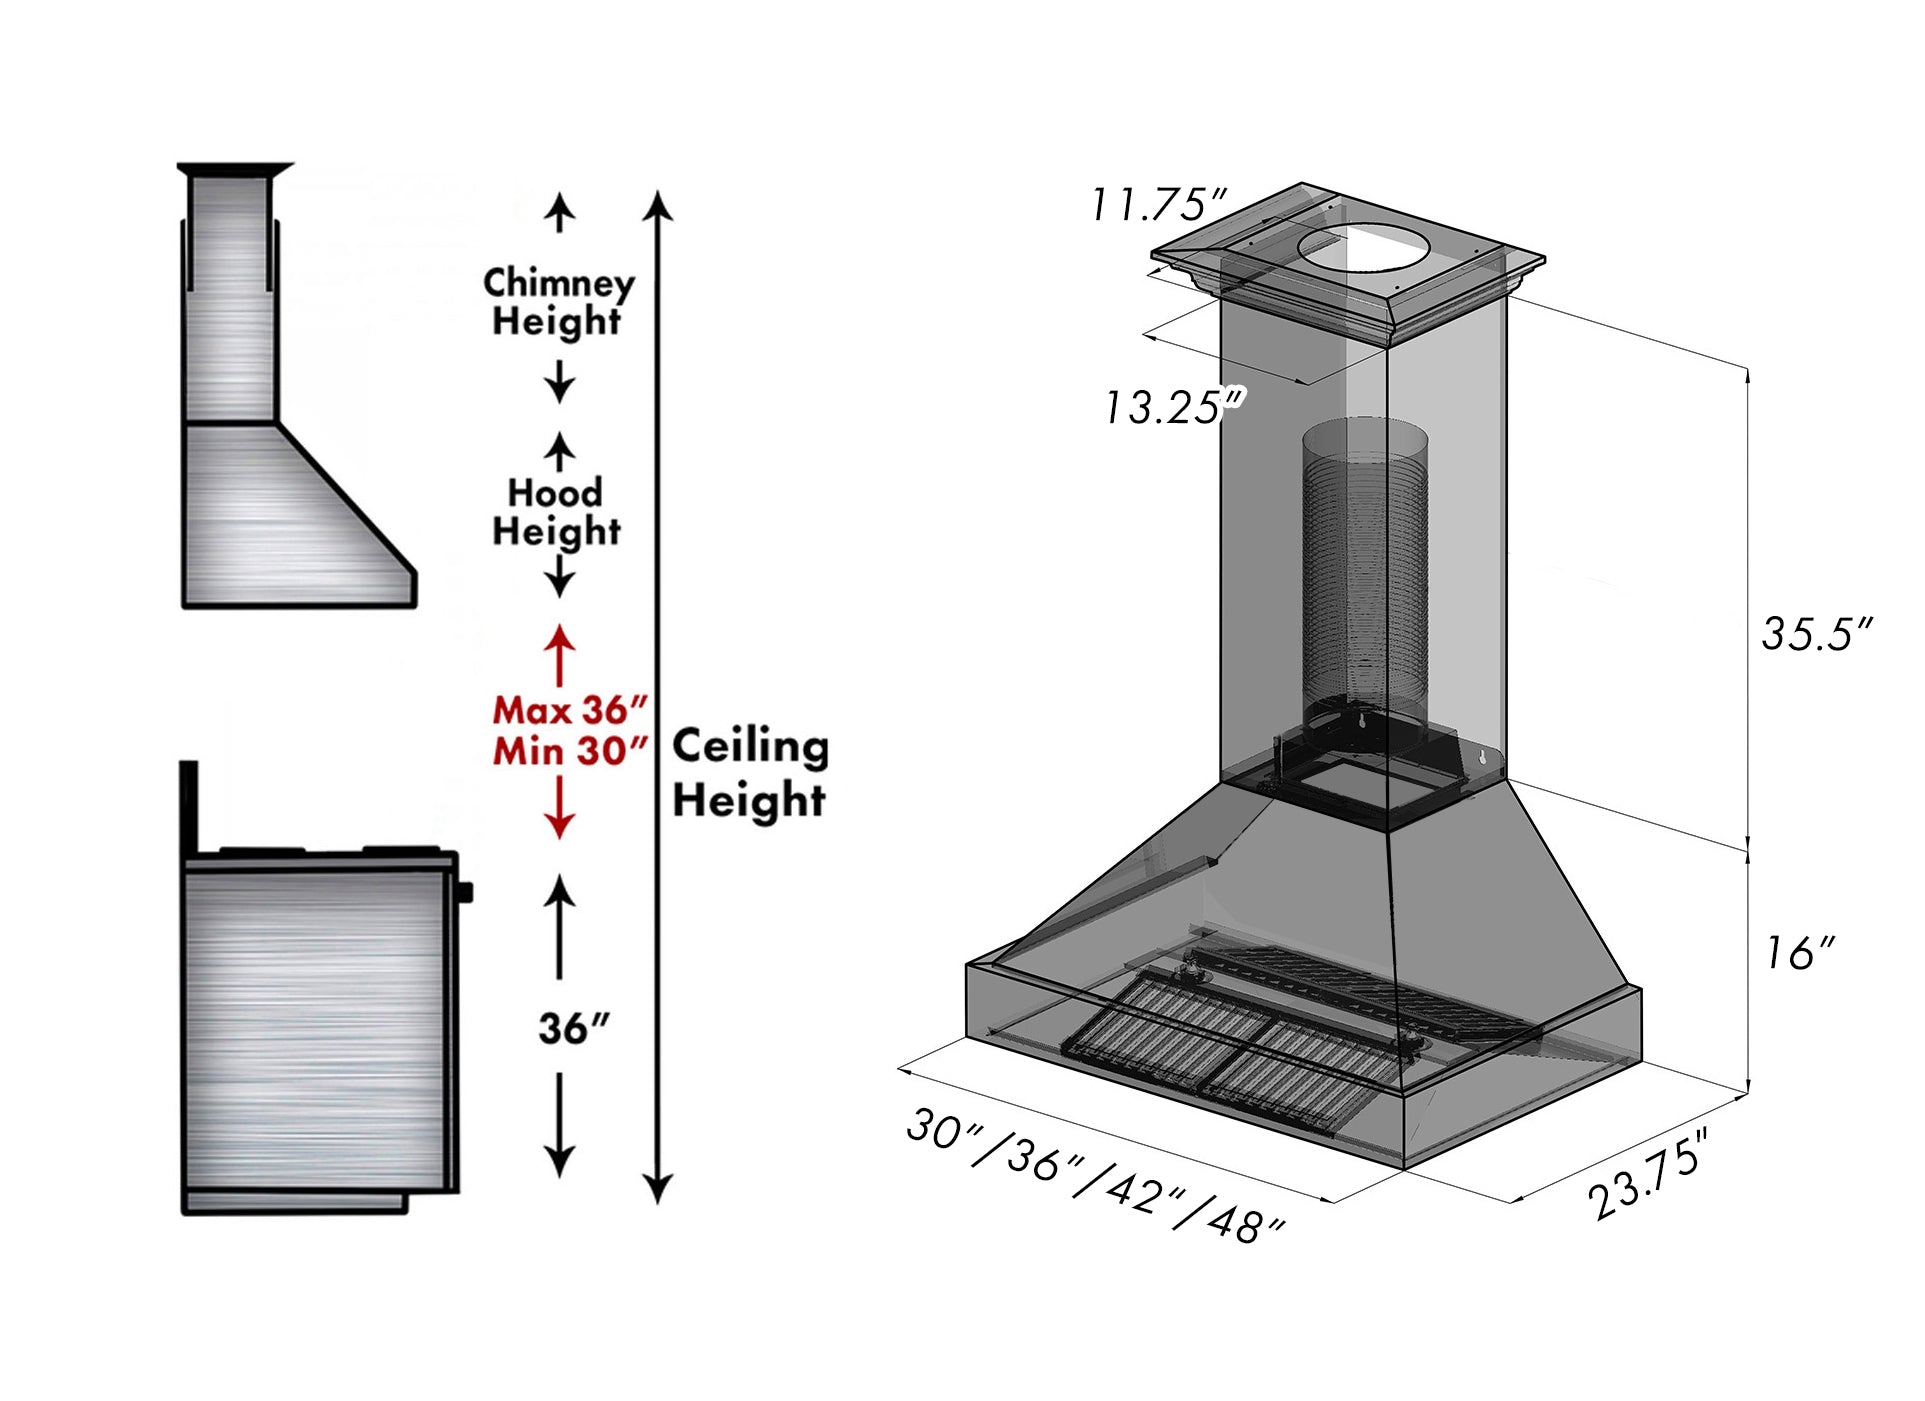 ZLINE Ducted Fingerprint Resistant Stainless Steel Range Hood with Copper Shell (8654C) dimensional diagram with measurements.